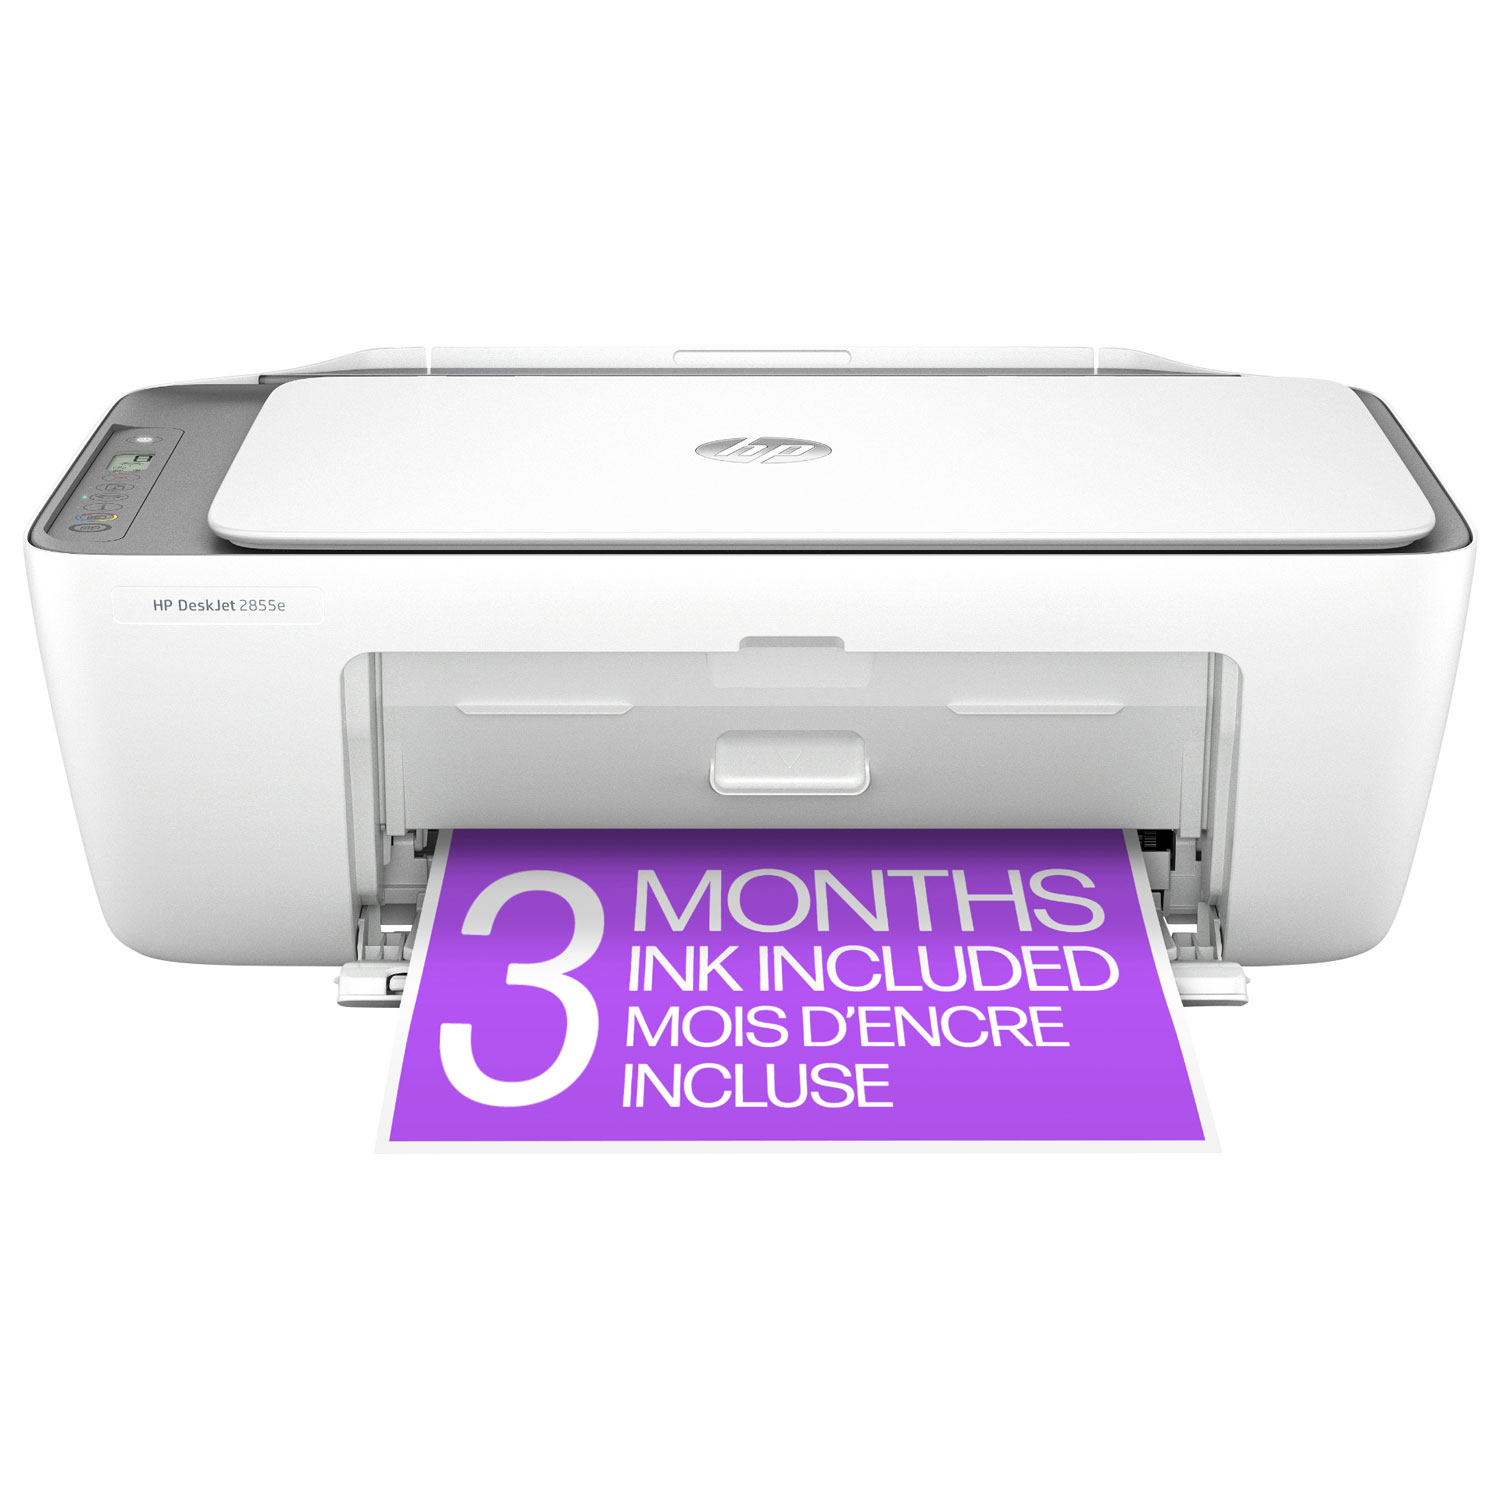 HP DeskJet 2855e Wireless All-In-One Inkjet Printer - HP Instant Ink 3-Month Free Trial Included*